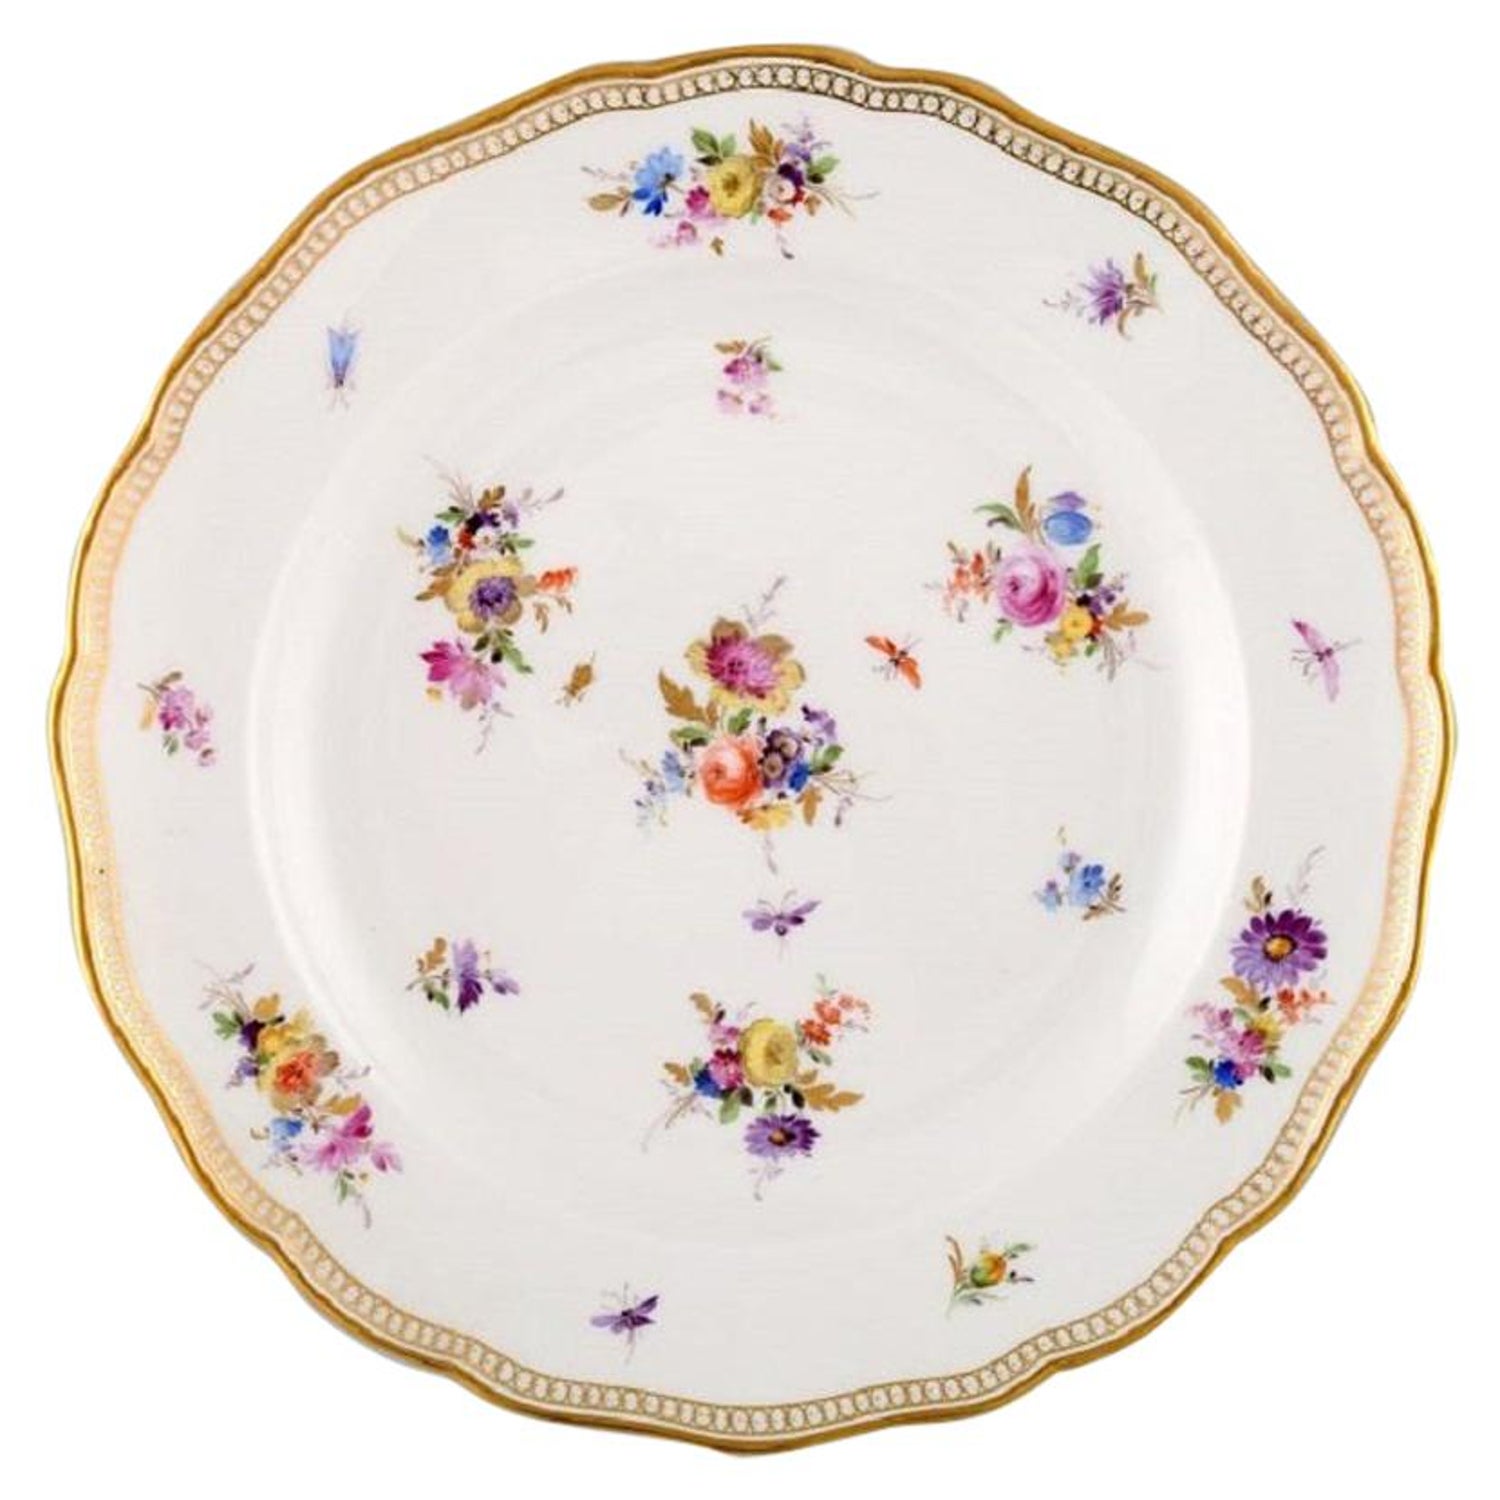 2 Meissen Scattered flowers 6\u201d plates with lace gilded edge.